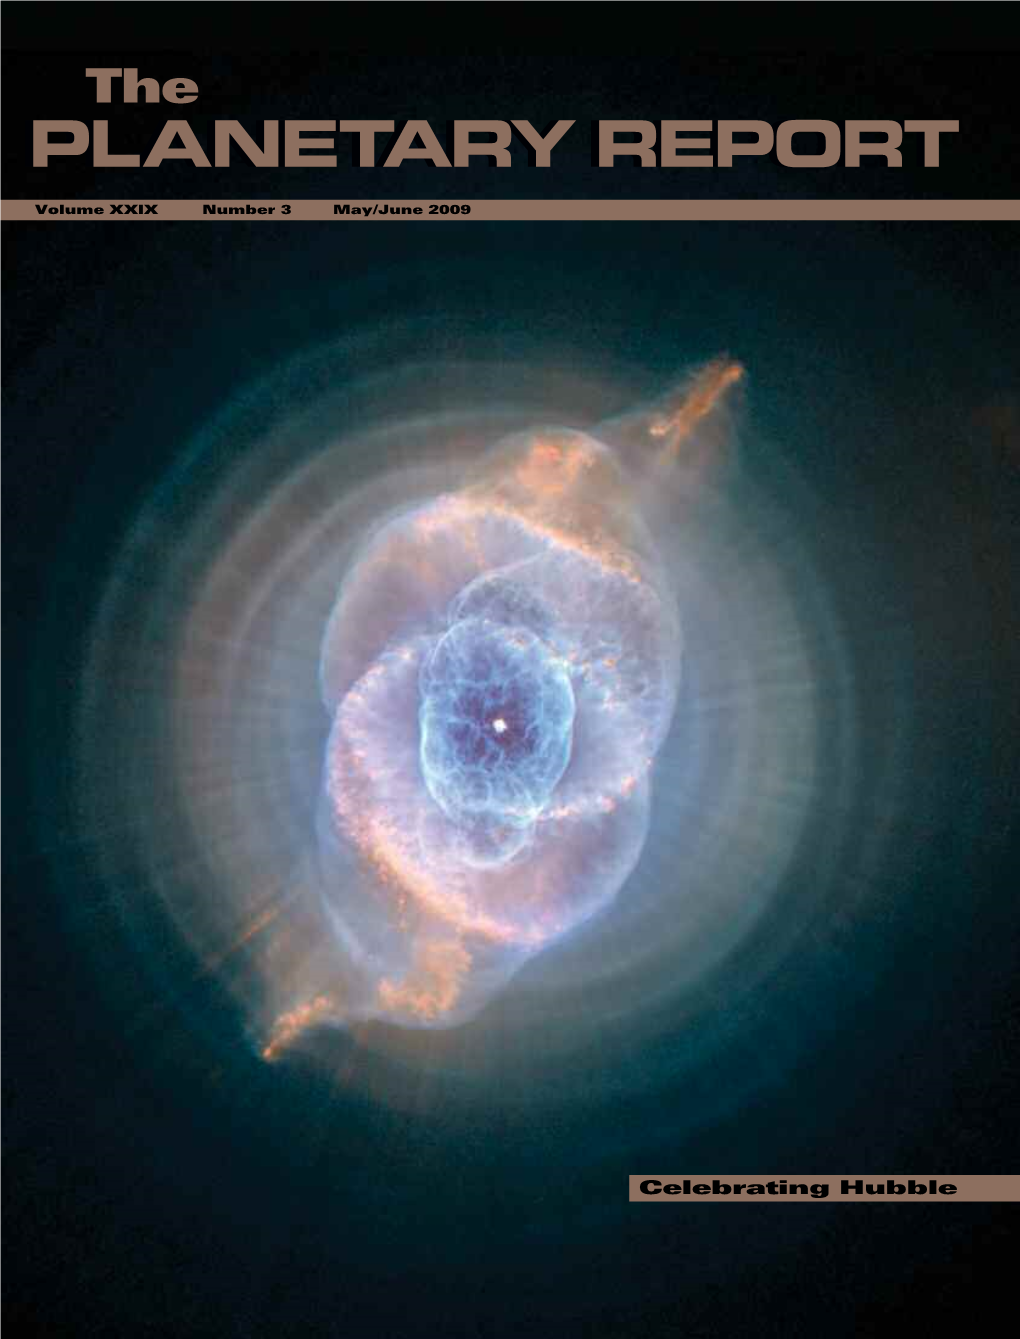 Planetary Report, More Than the Cat’S Eye Nebula (NGC 6543) Was One of the First Planetary Any Other Issue I Can Recall, Reflects the Ideas, Nebulae to Be Discovered